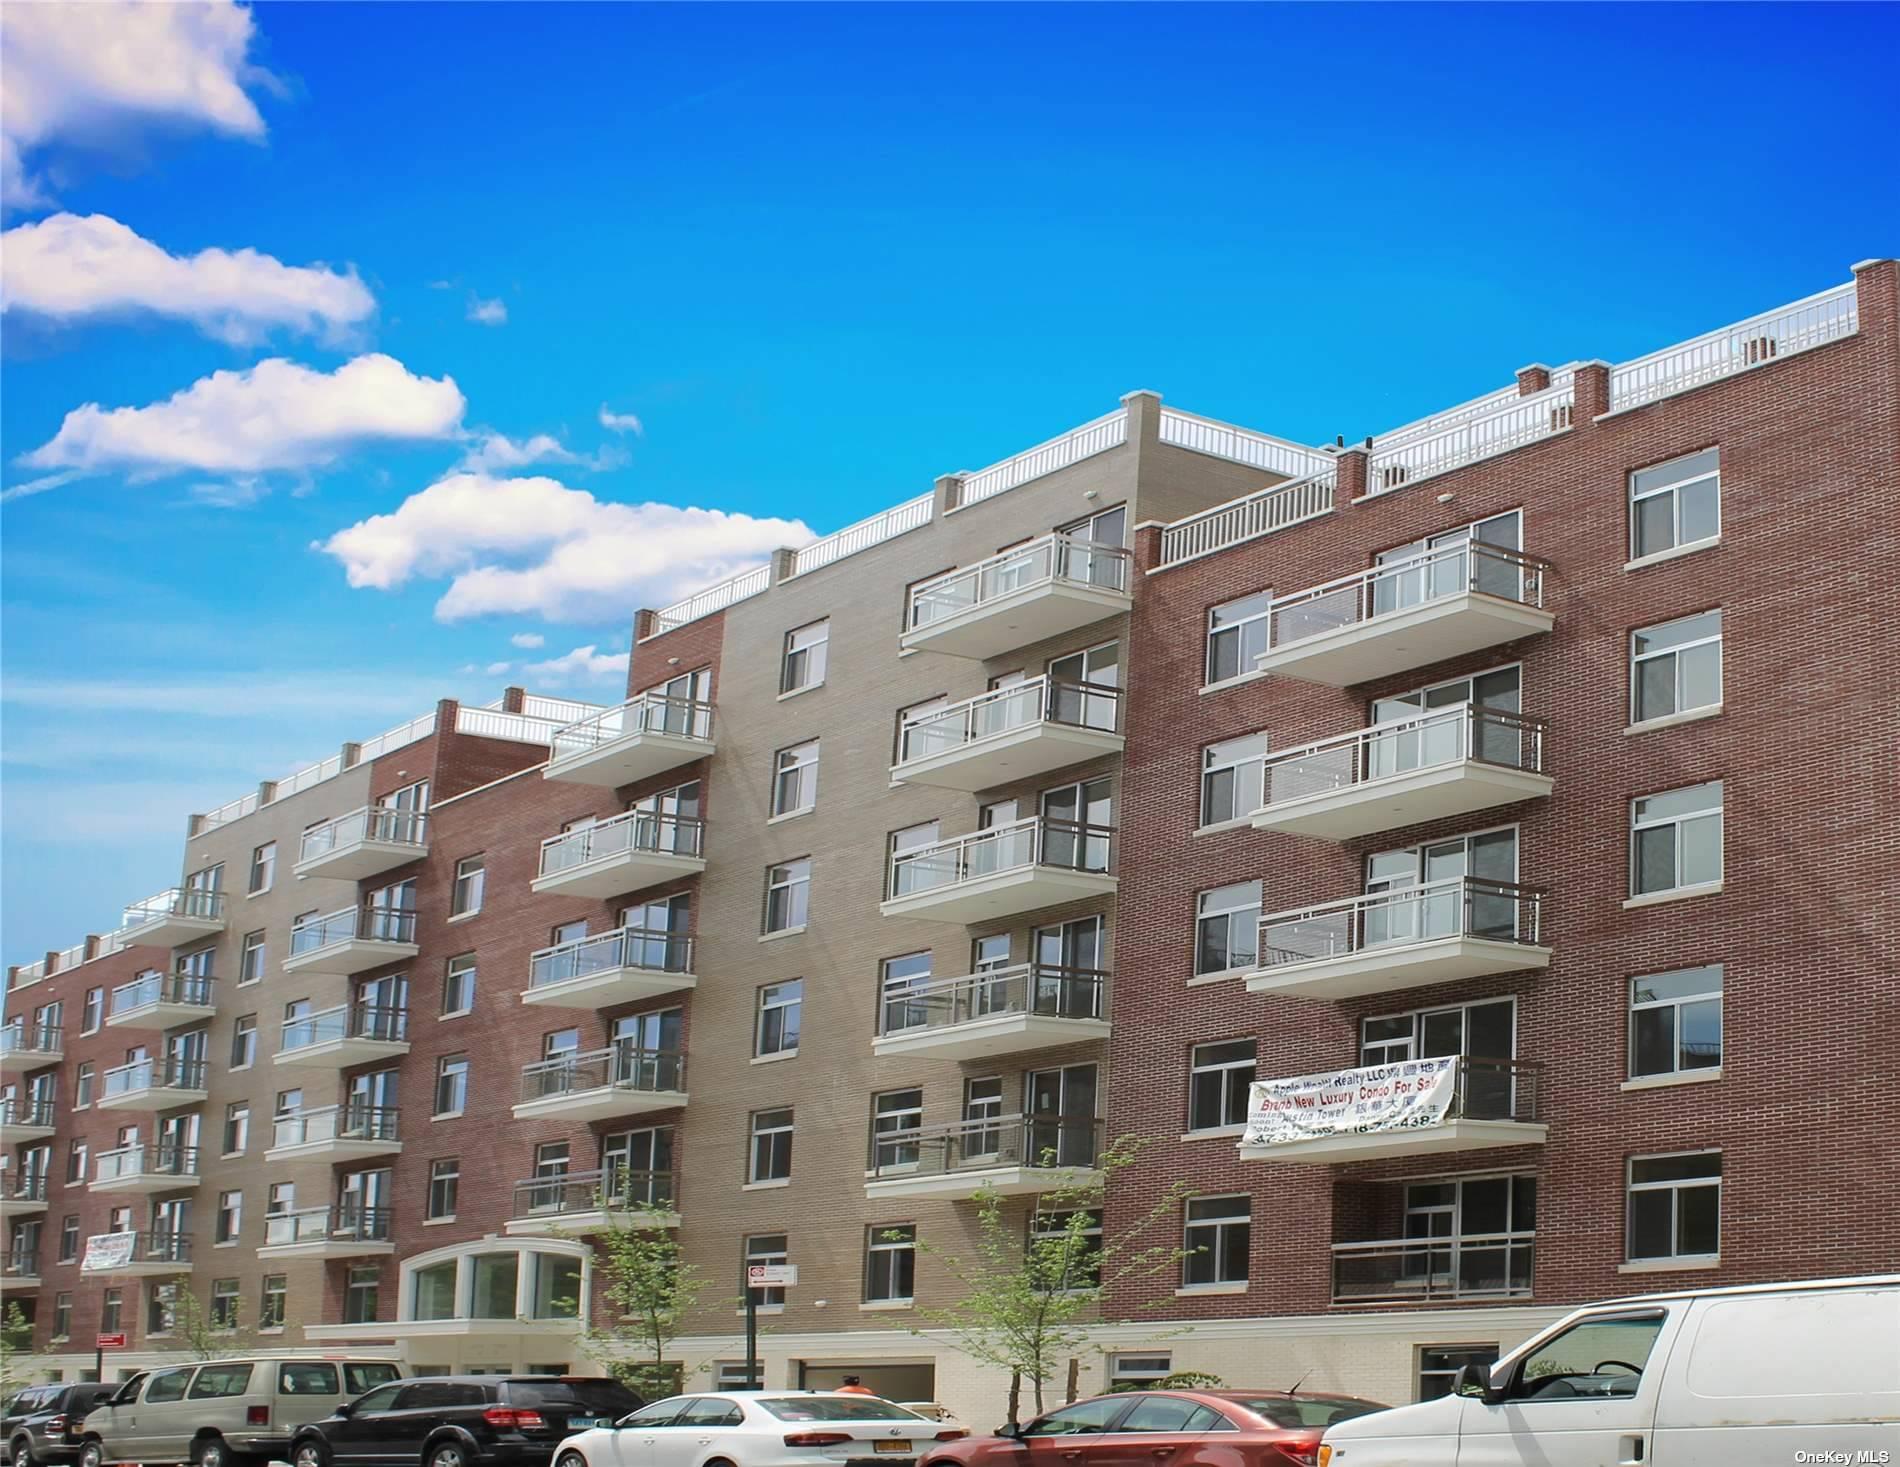 65-38 Austin Street #2E in Queens, Rego Park, NY 11374